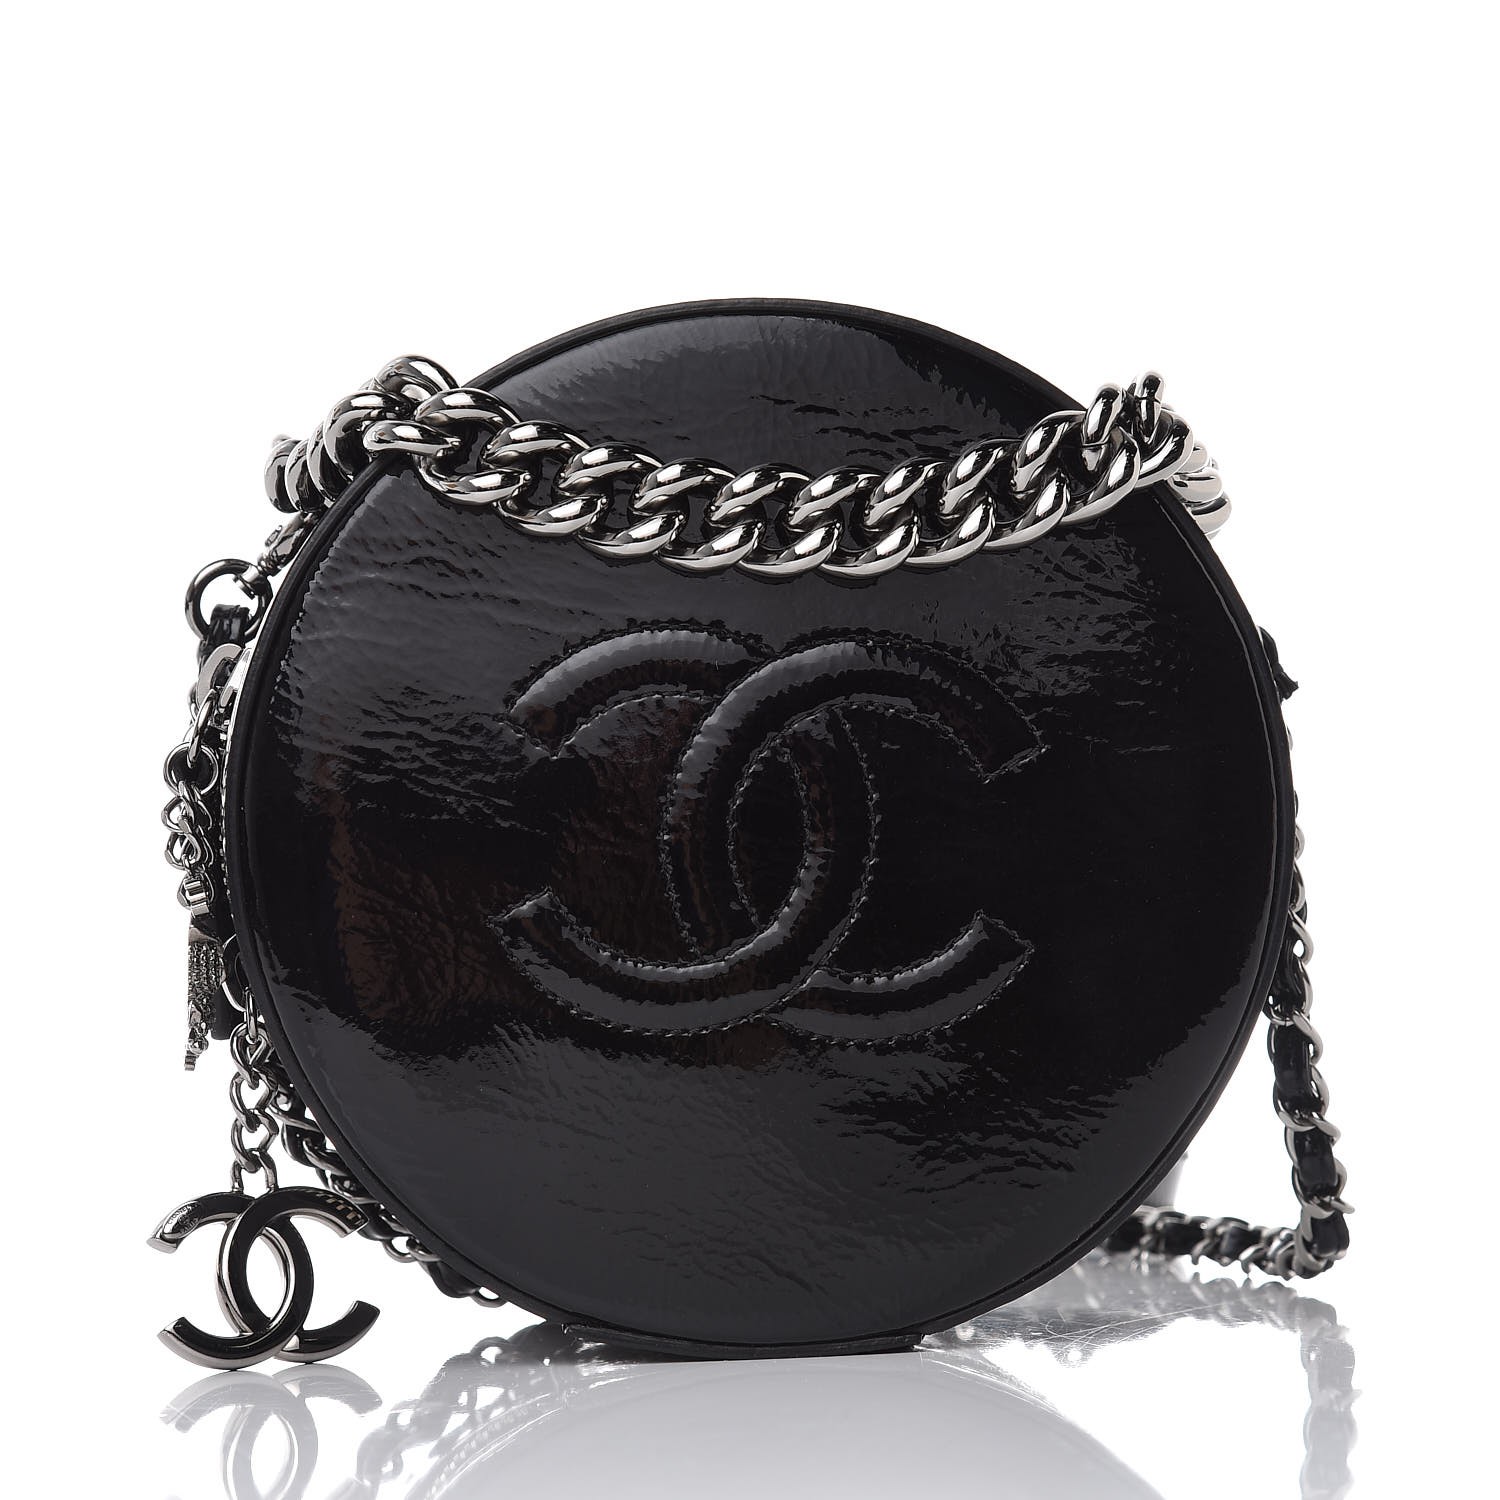 CHANEL Patent Round As Earth Evening Bag Black 350592 | FASHIONPHILE